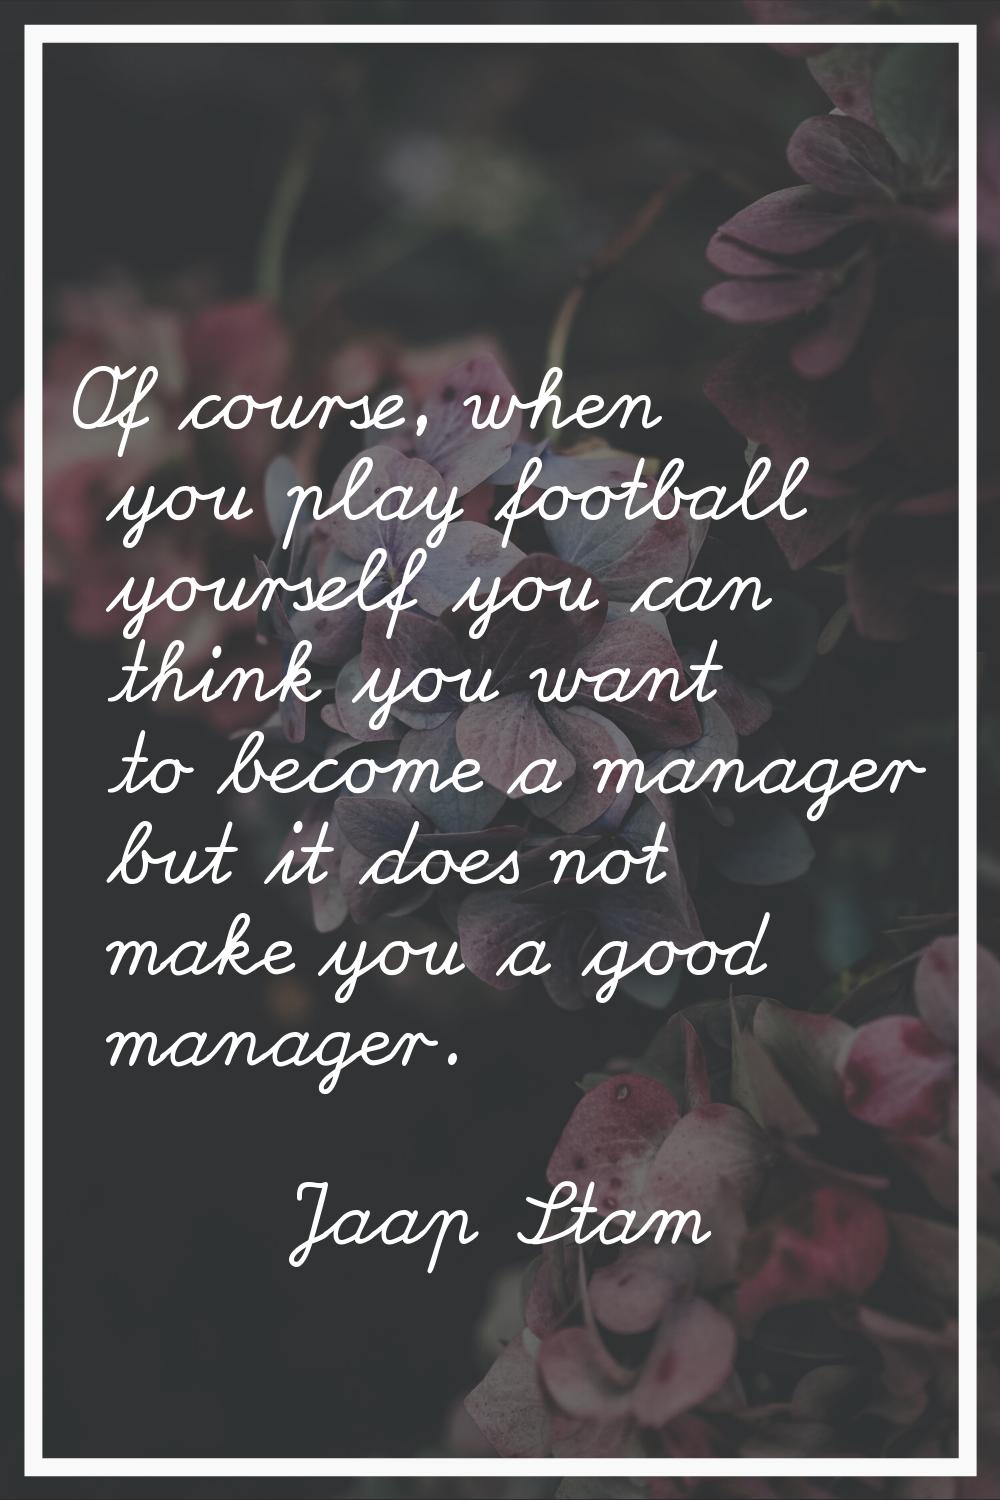 Of course, when you play football yourself you can think you want to become a manager but it does n